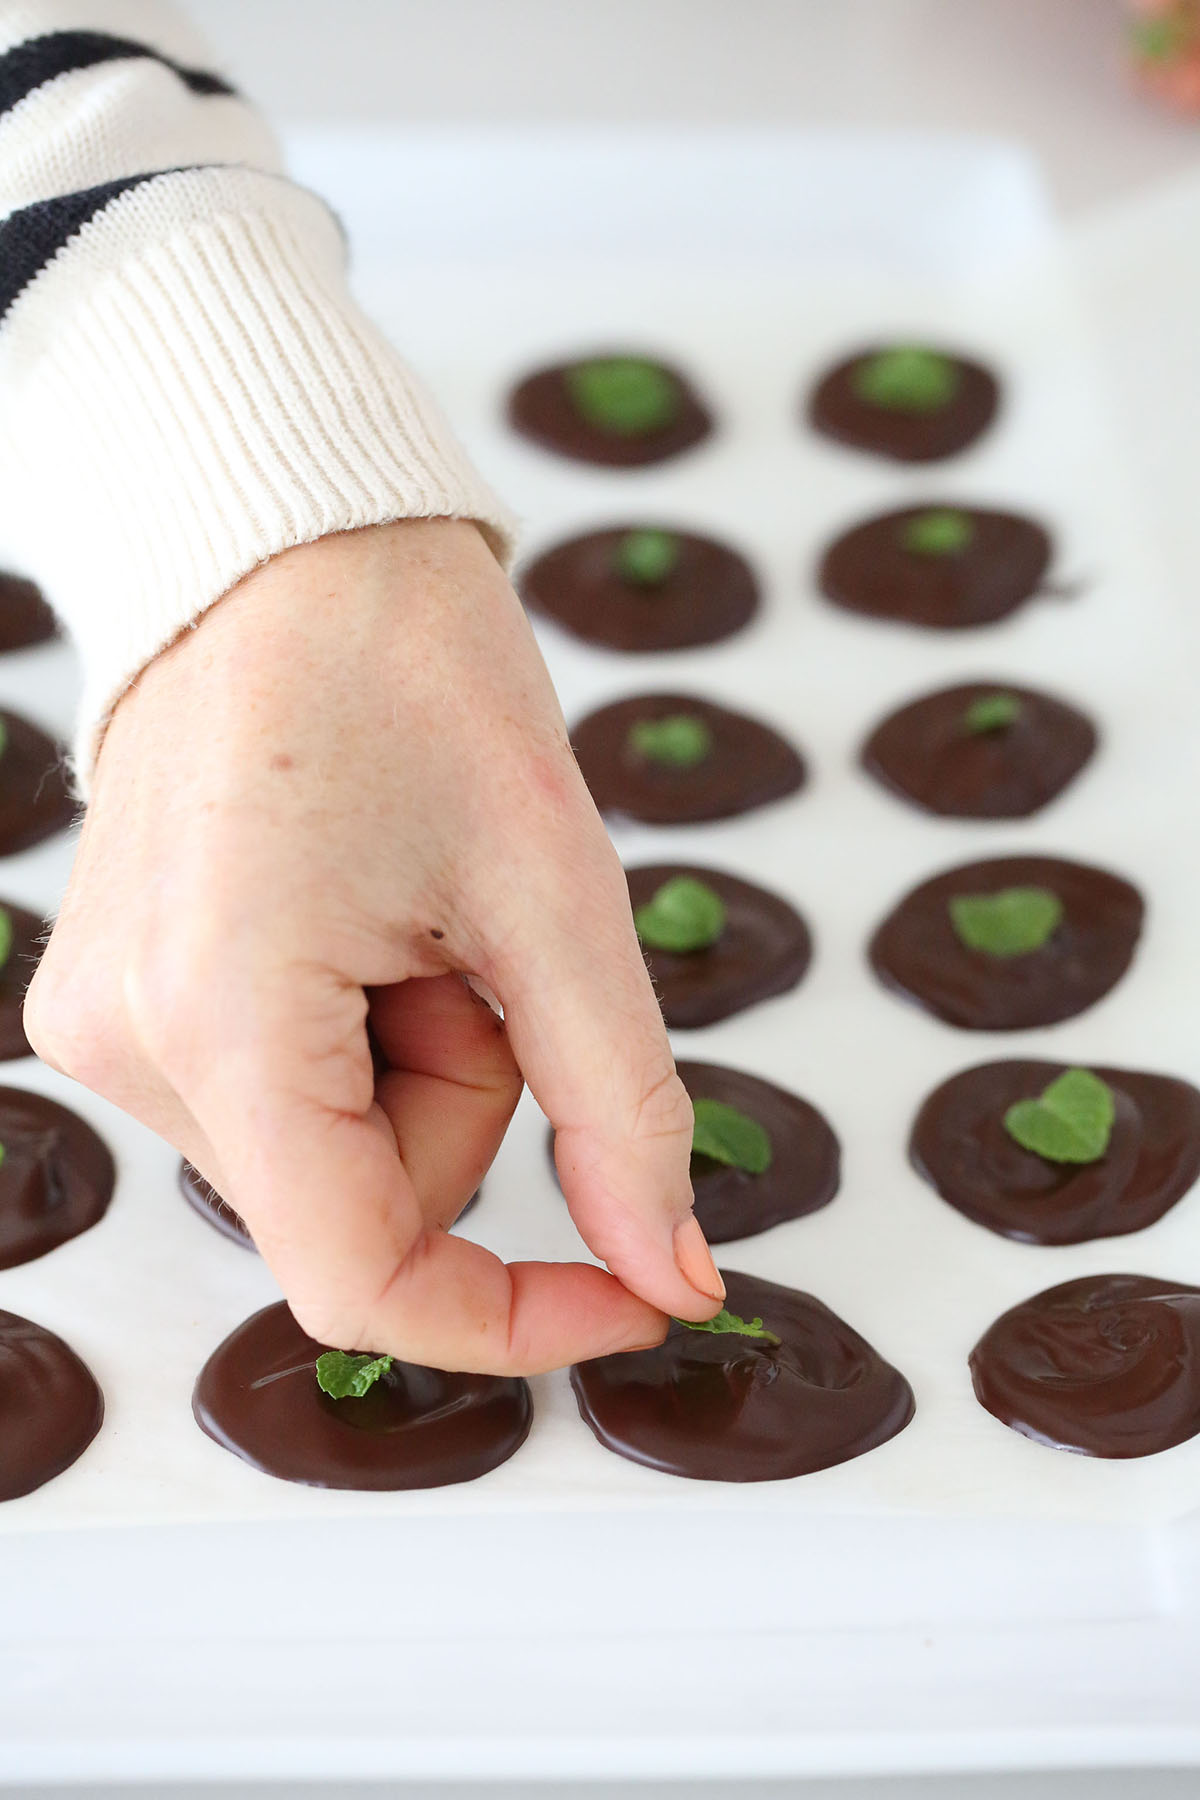 Chocolate mint buttons, these are drops of dark chocolate mint bliss. Made with just 2 ingredients - dark dairy free chocolate and pure peppermint essential oil, they’re vegan and low sugar too.